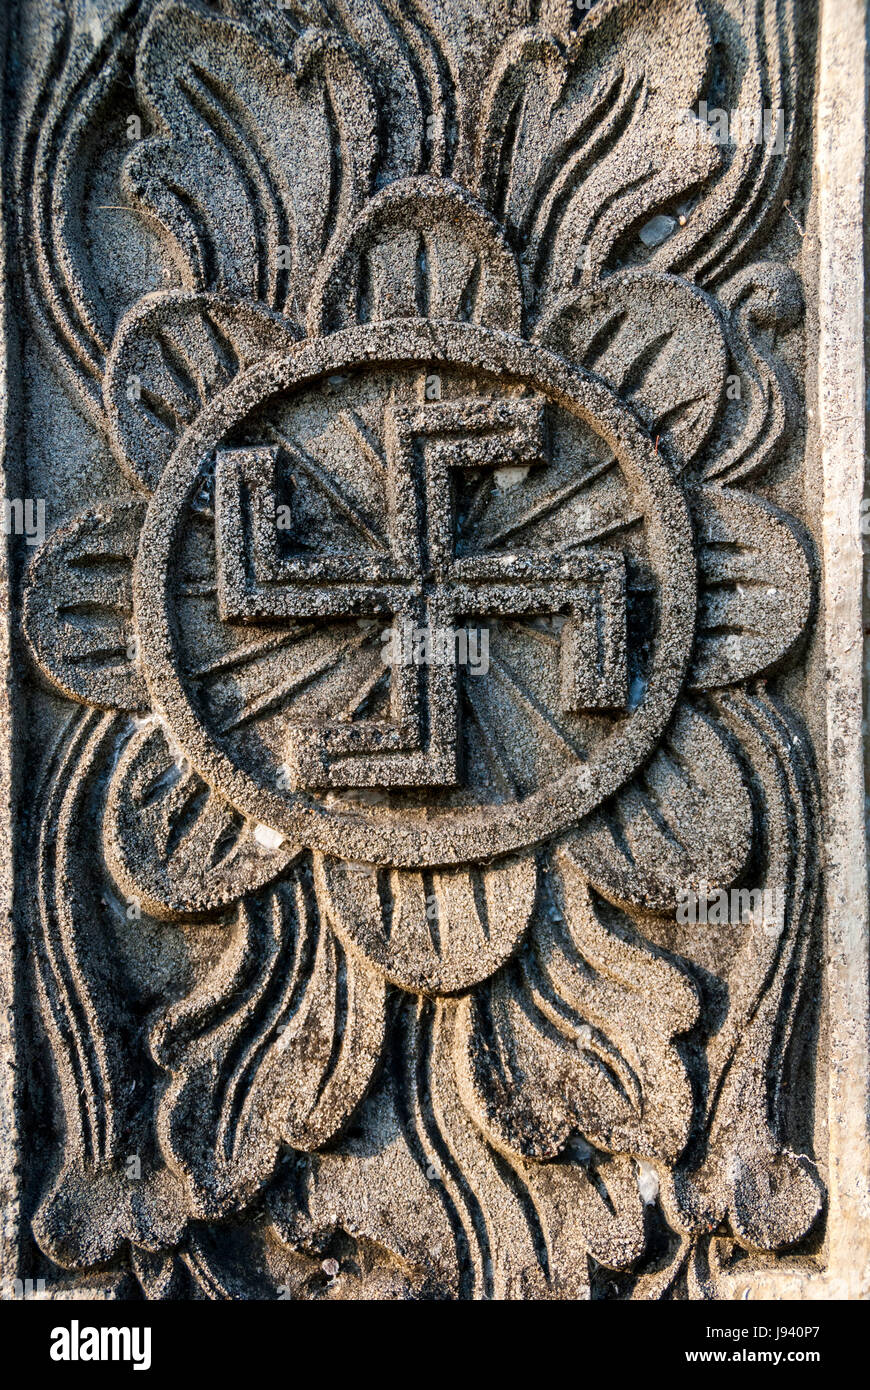 Detail of hindu temple with swastika symbol, Indonesia Stock Photo